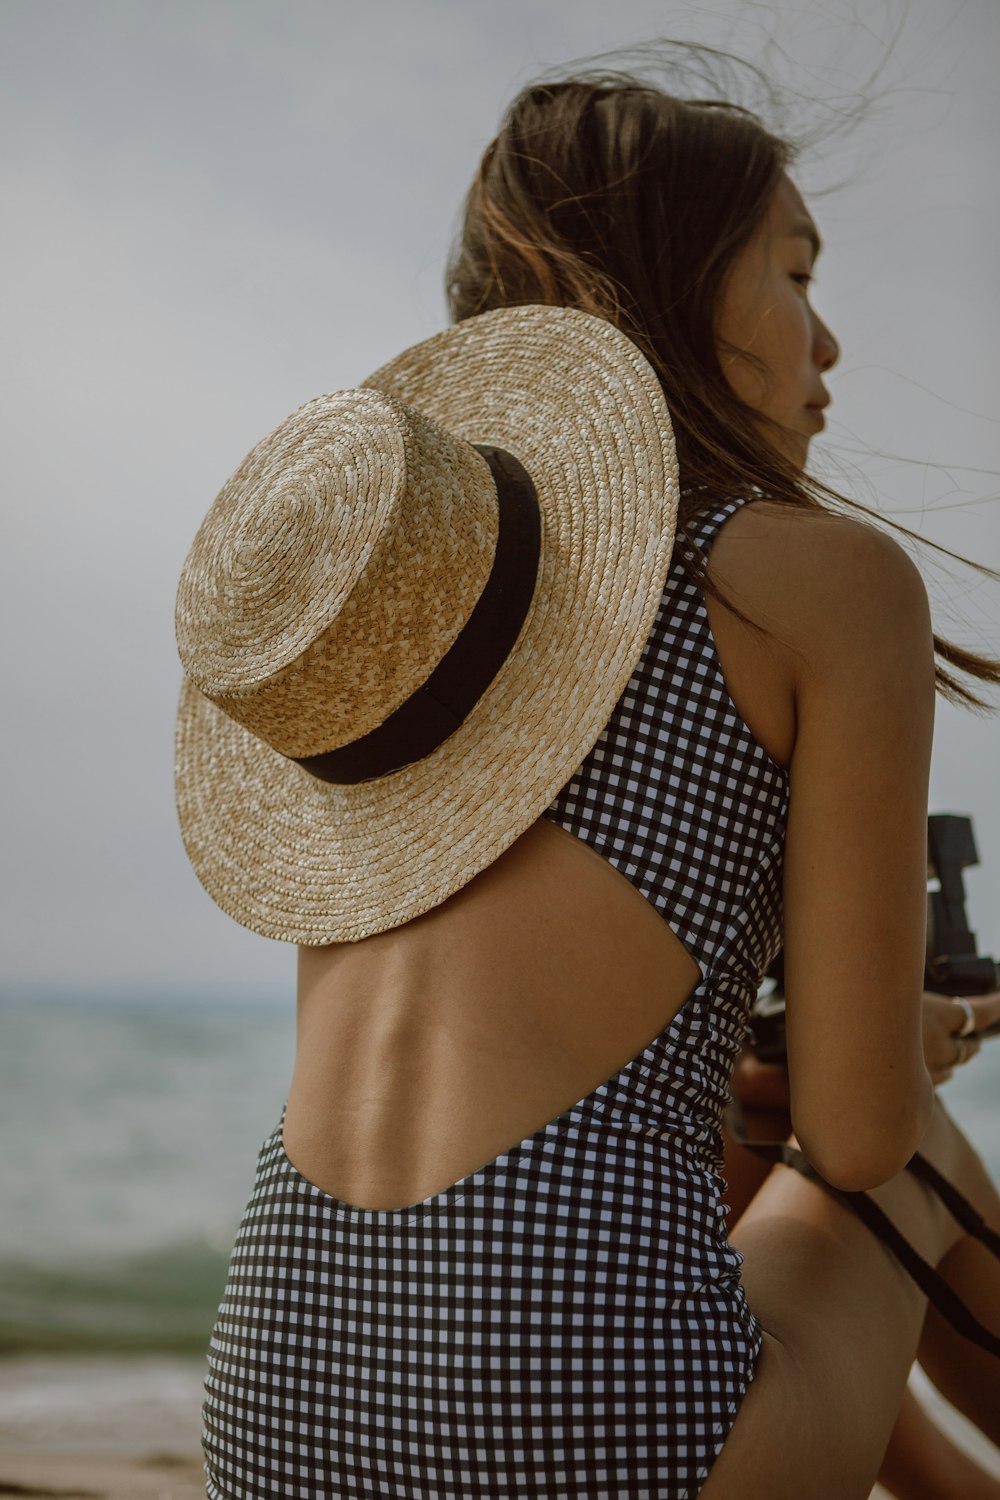 woman in black and white polka dot spaghetti strap top wearing brown straw hat